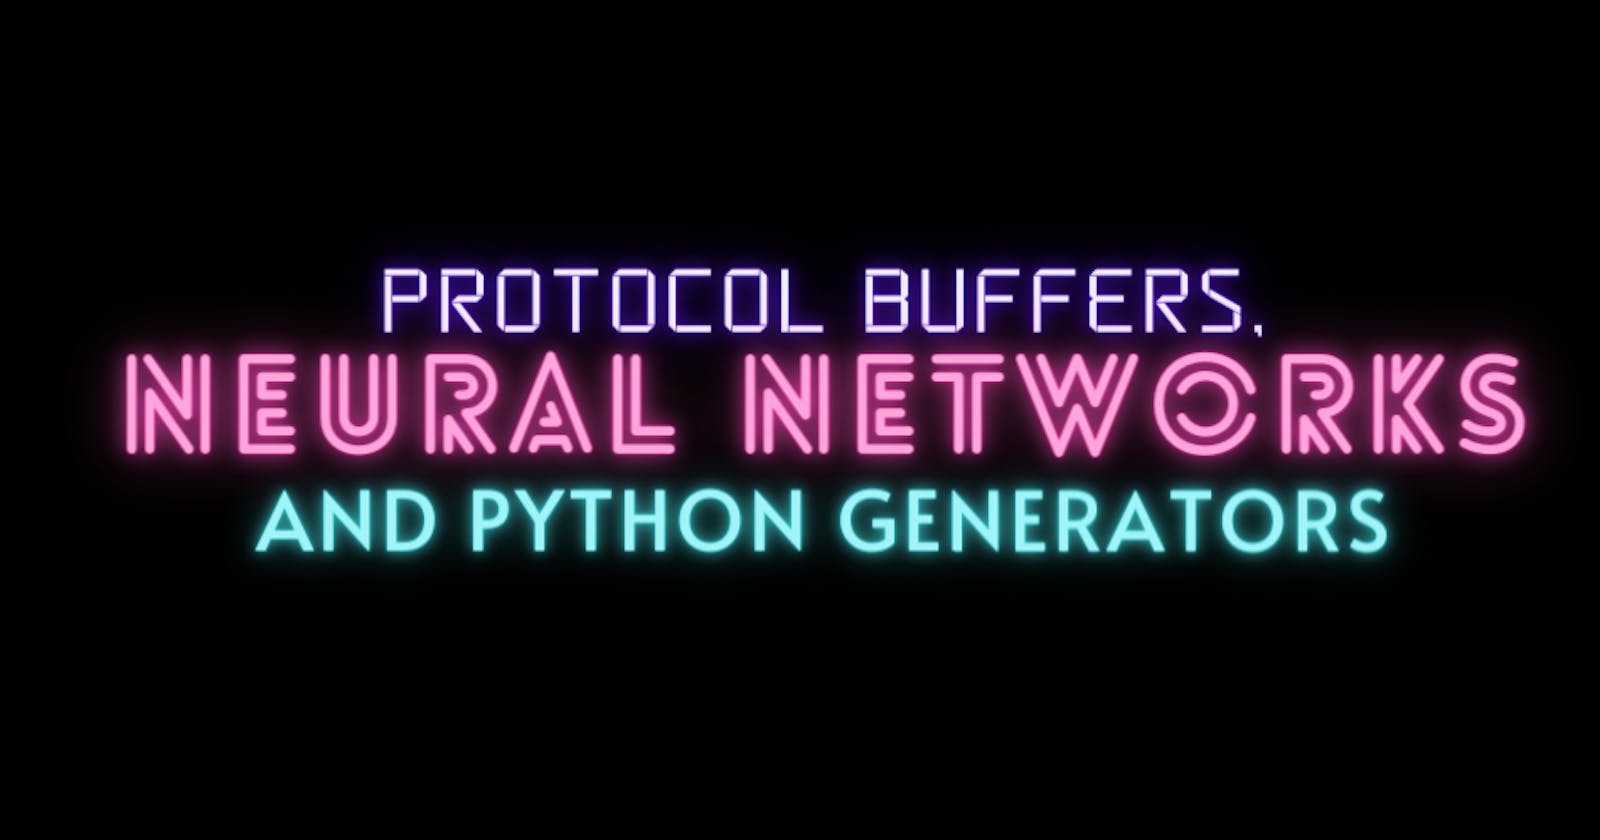 Protocol Buffers, Neural Networks and Python Generators